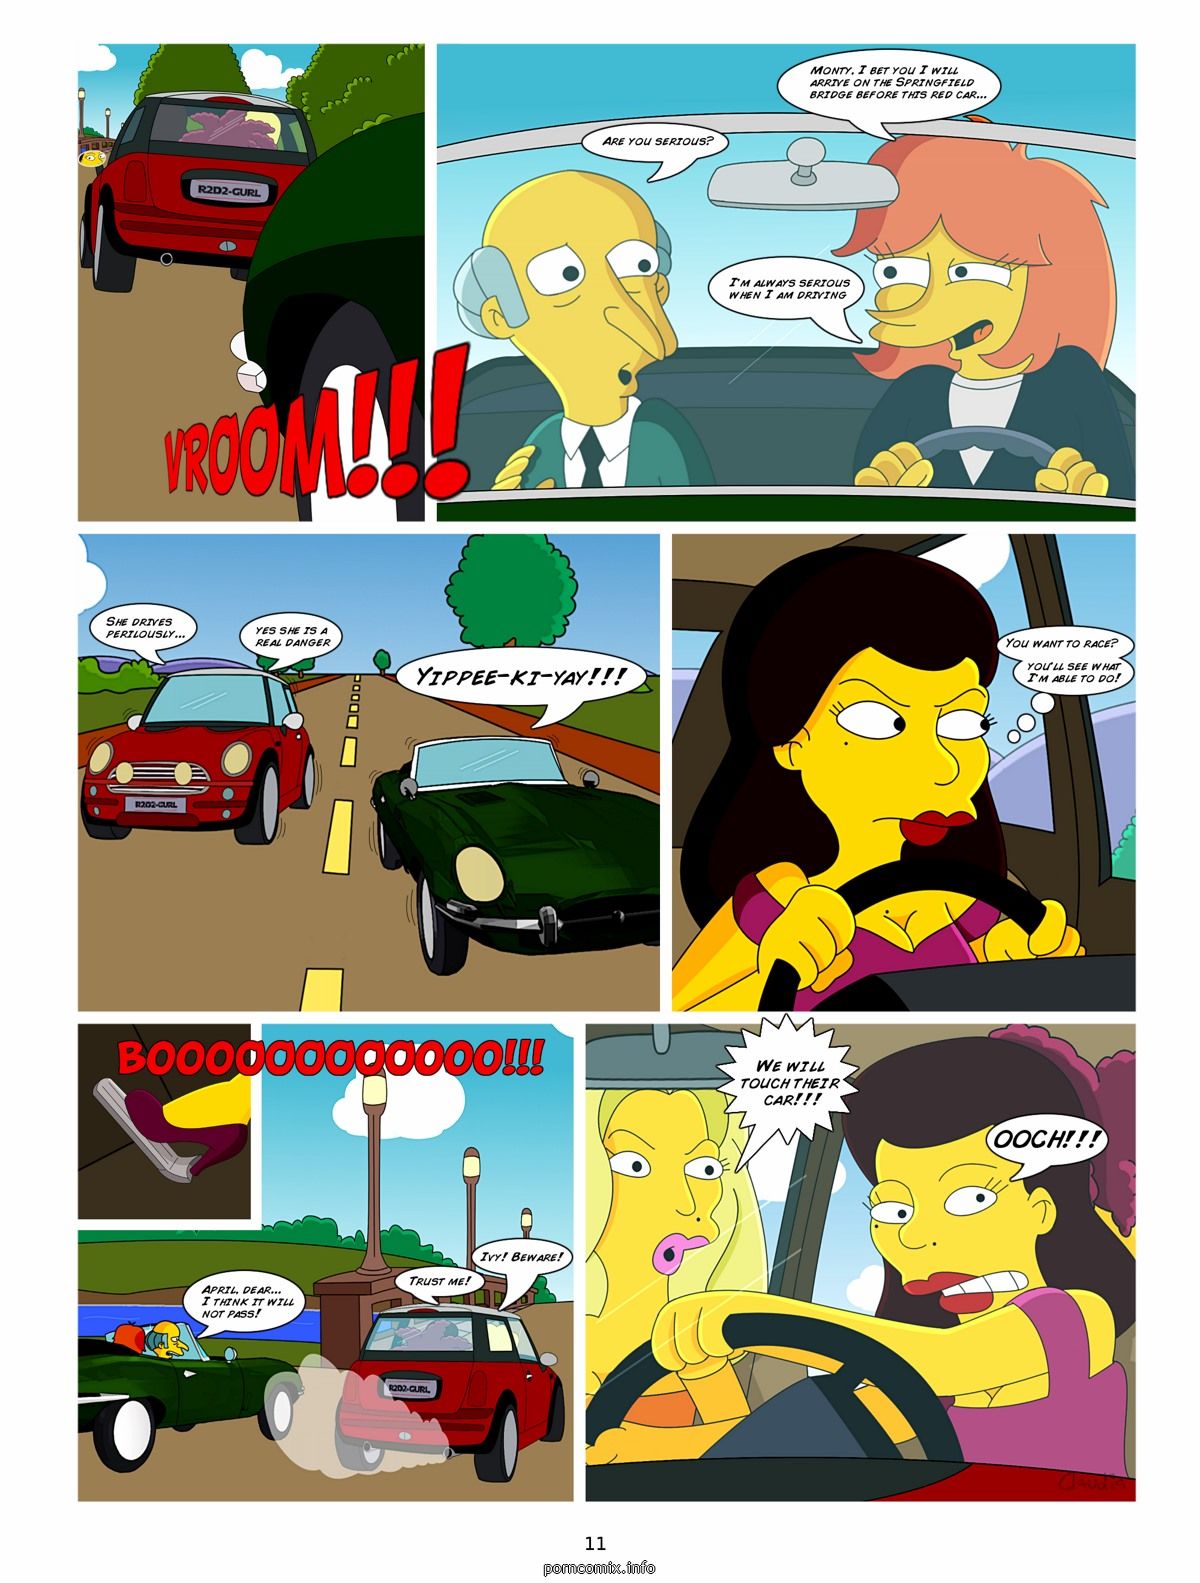 [Claudia] The Simpsons - Road To Springfield page 12